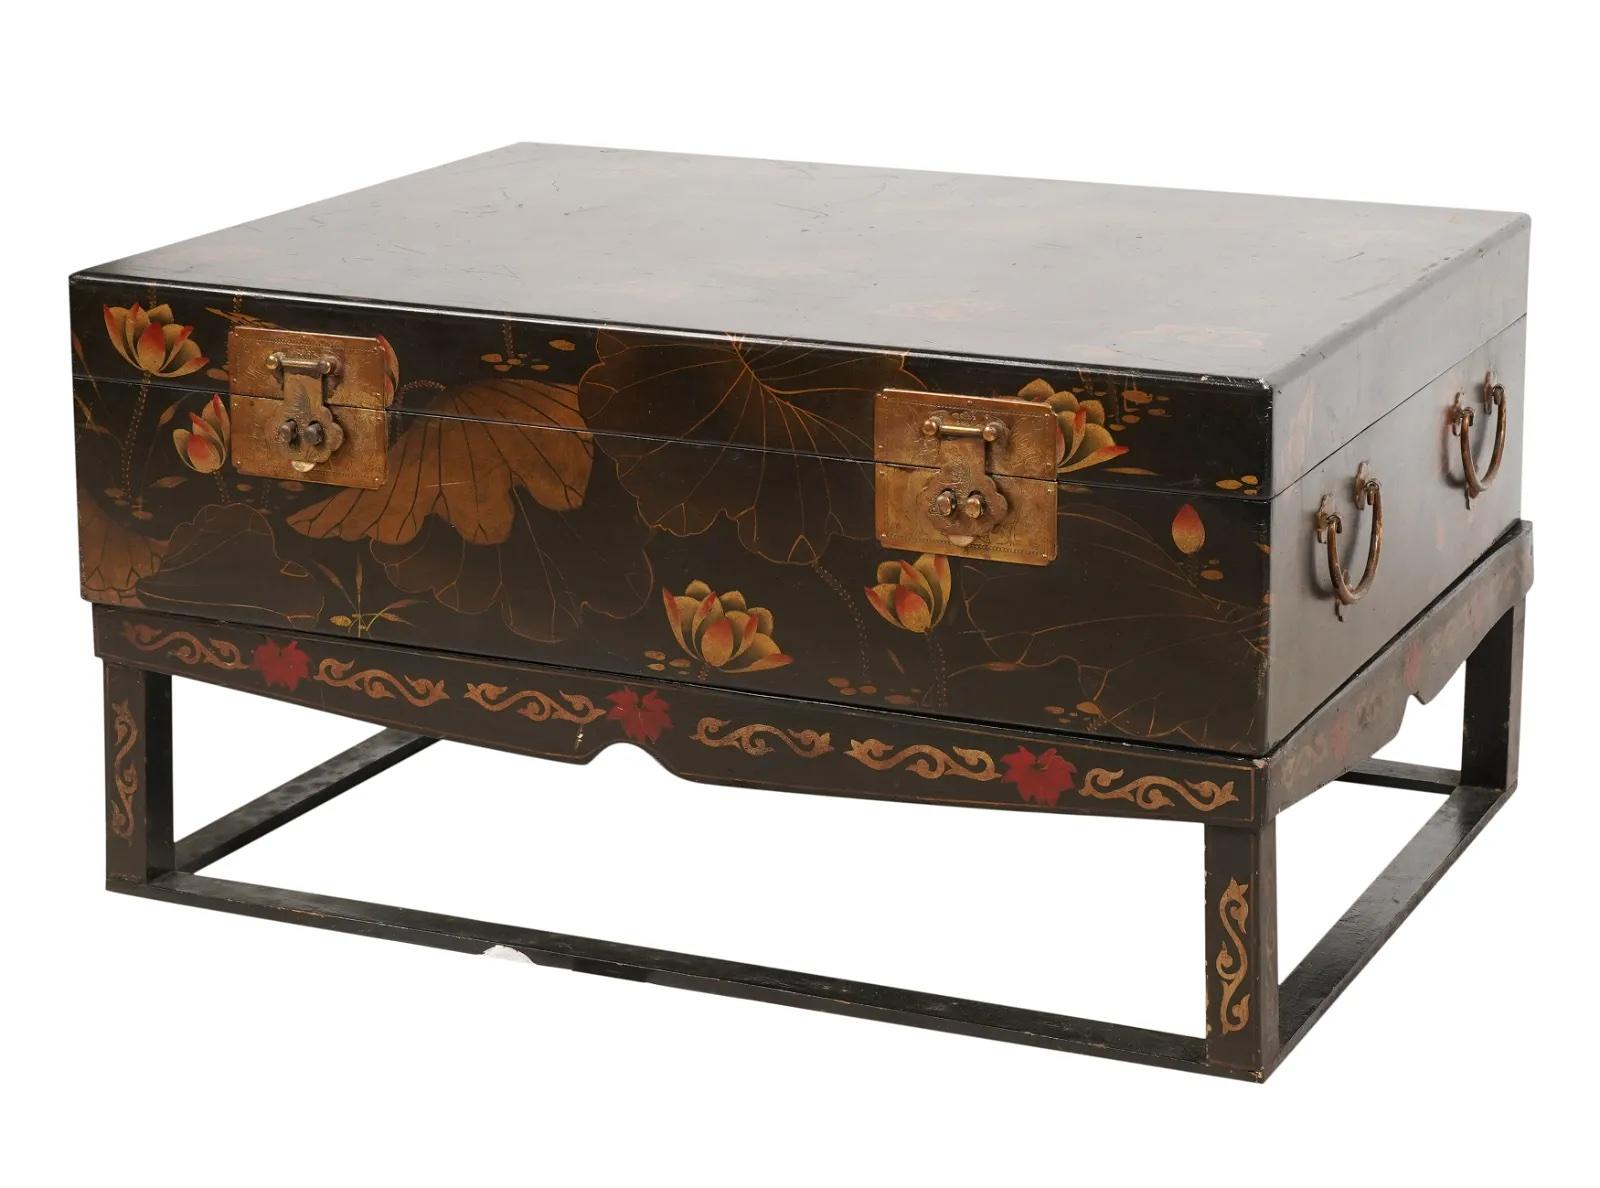 Early 20th Century Chinese Hand Painted Wood Trunk on Paint Decorated Stand.  Overall Dimensions: 18